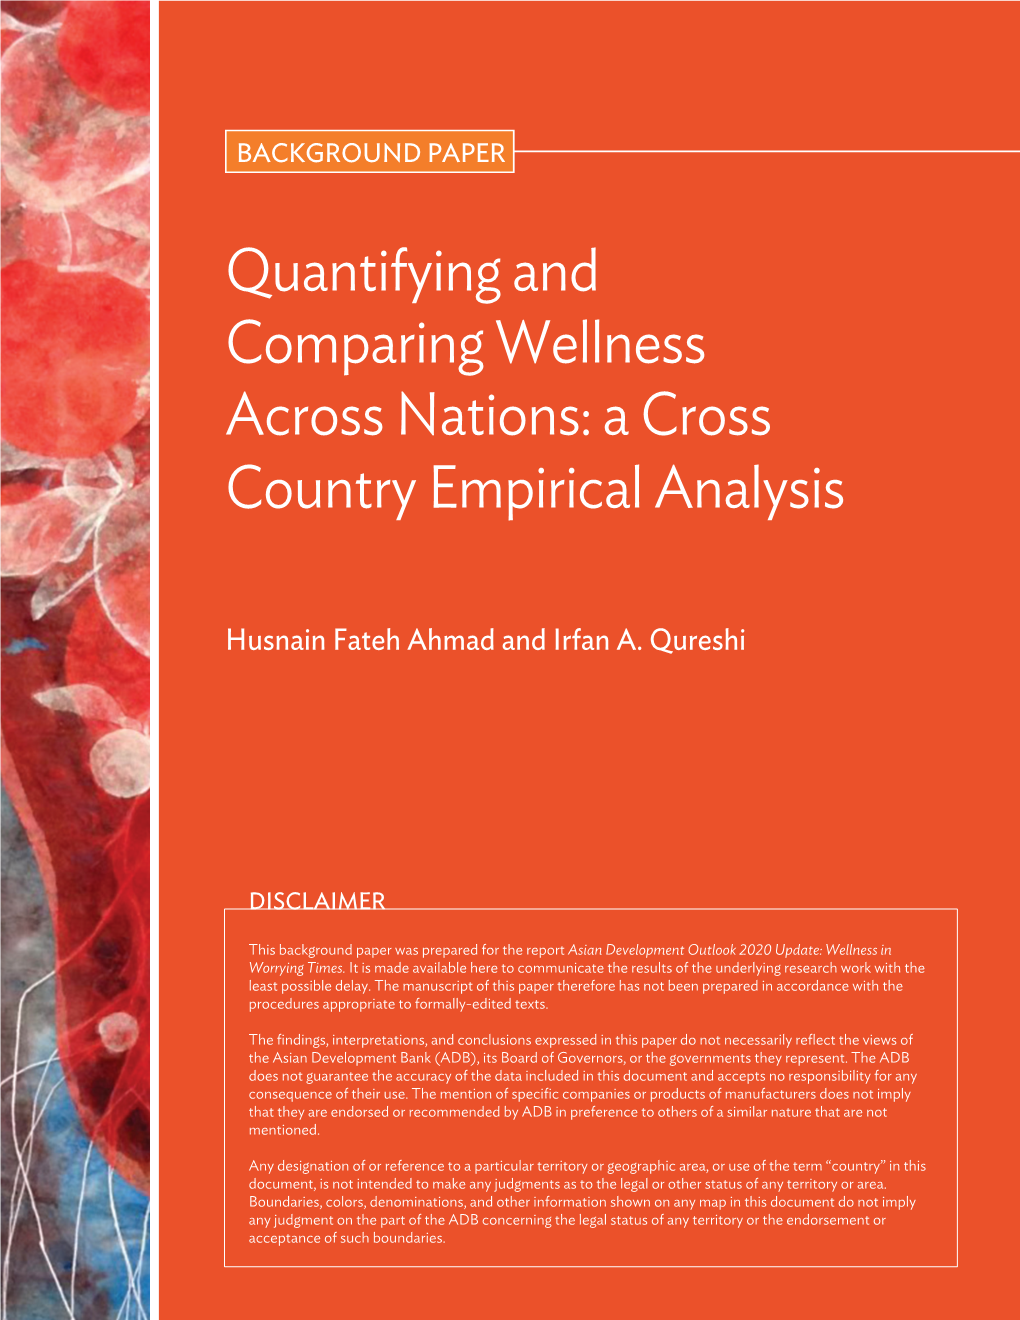 Quantifying and Comparing Wellness Across Nations: a Cross Country Empirical Analysis